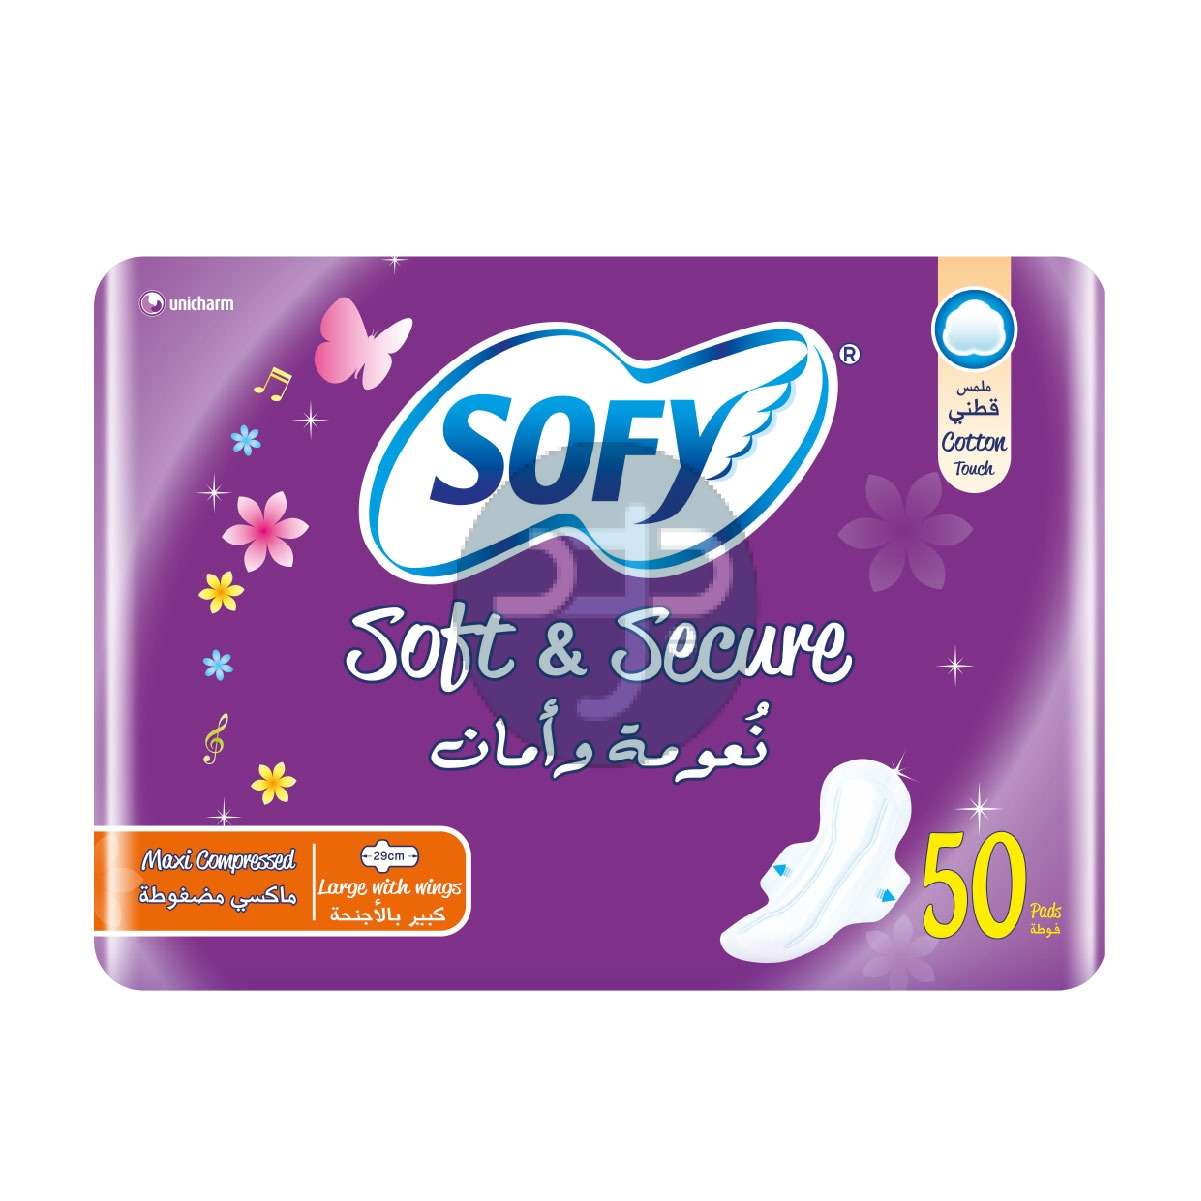 Product-SOFY Soft & Secure Sanitary Pads with Wings, Maxi Compressed, Regular 23 cm, Pack of 50 Pads